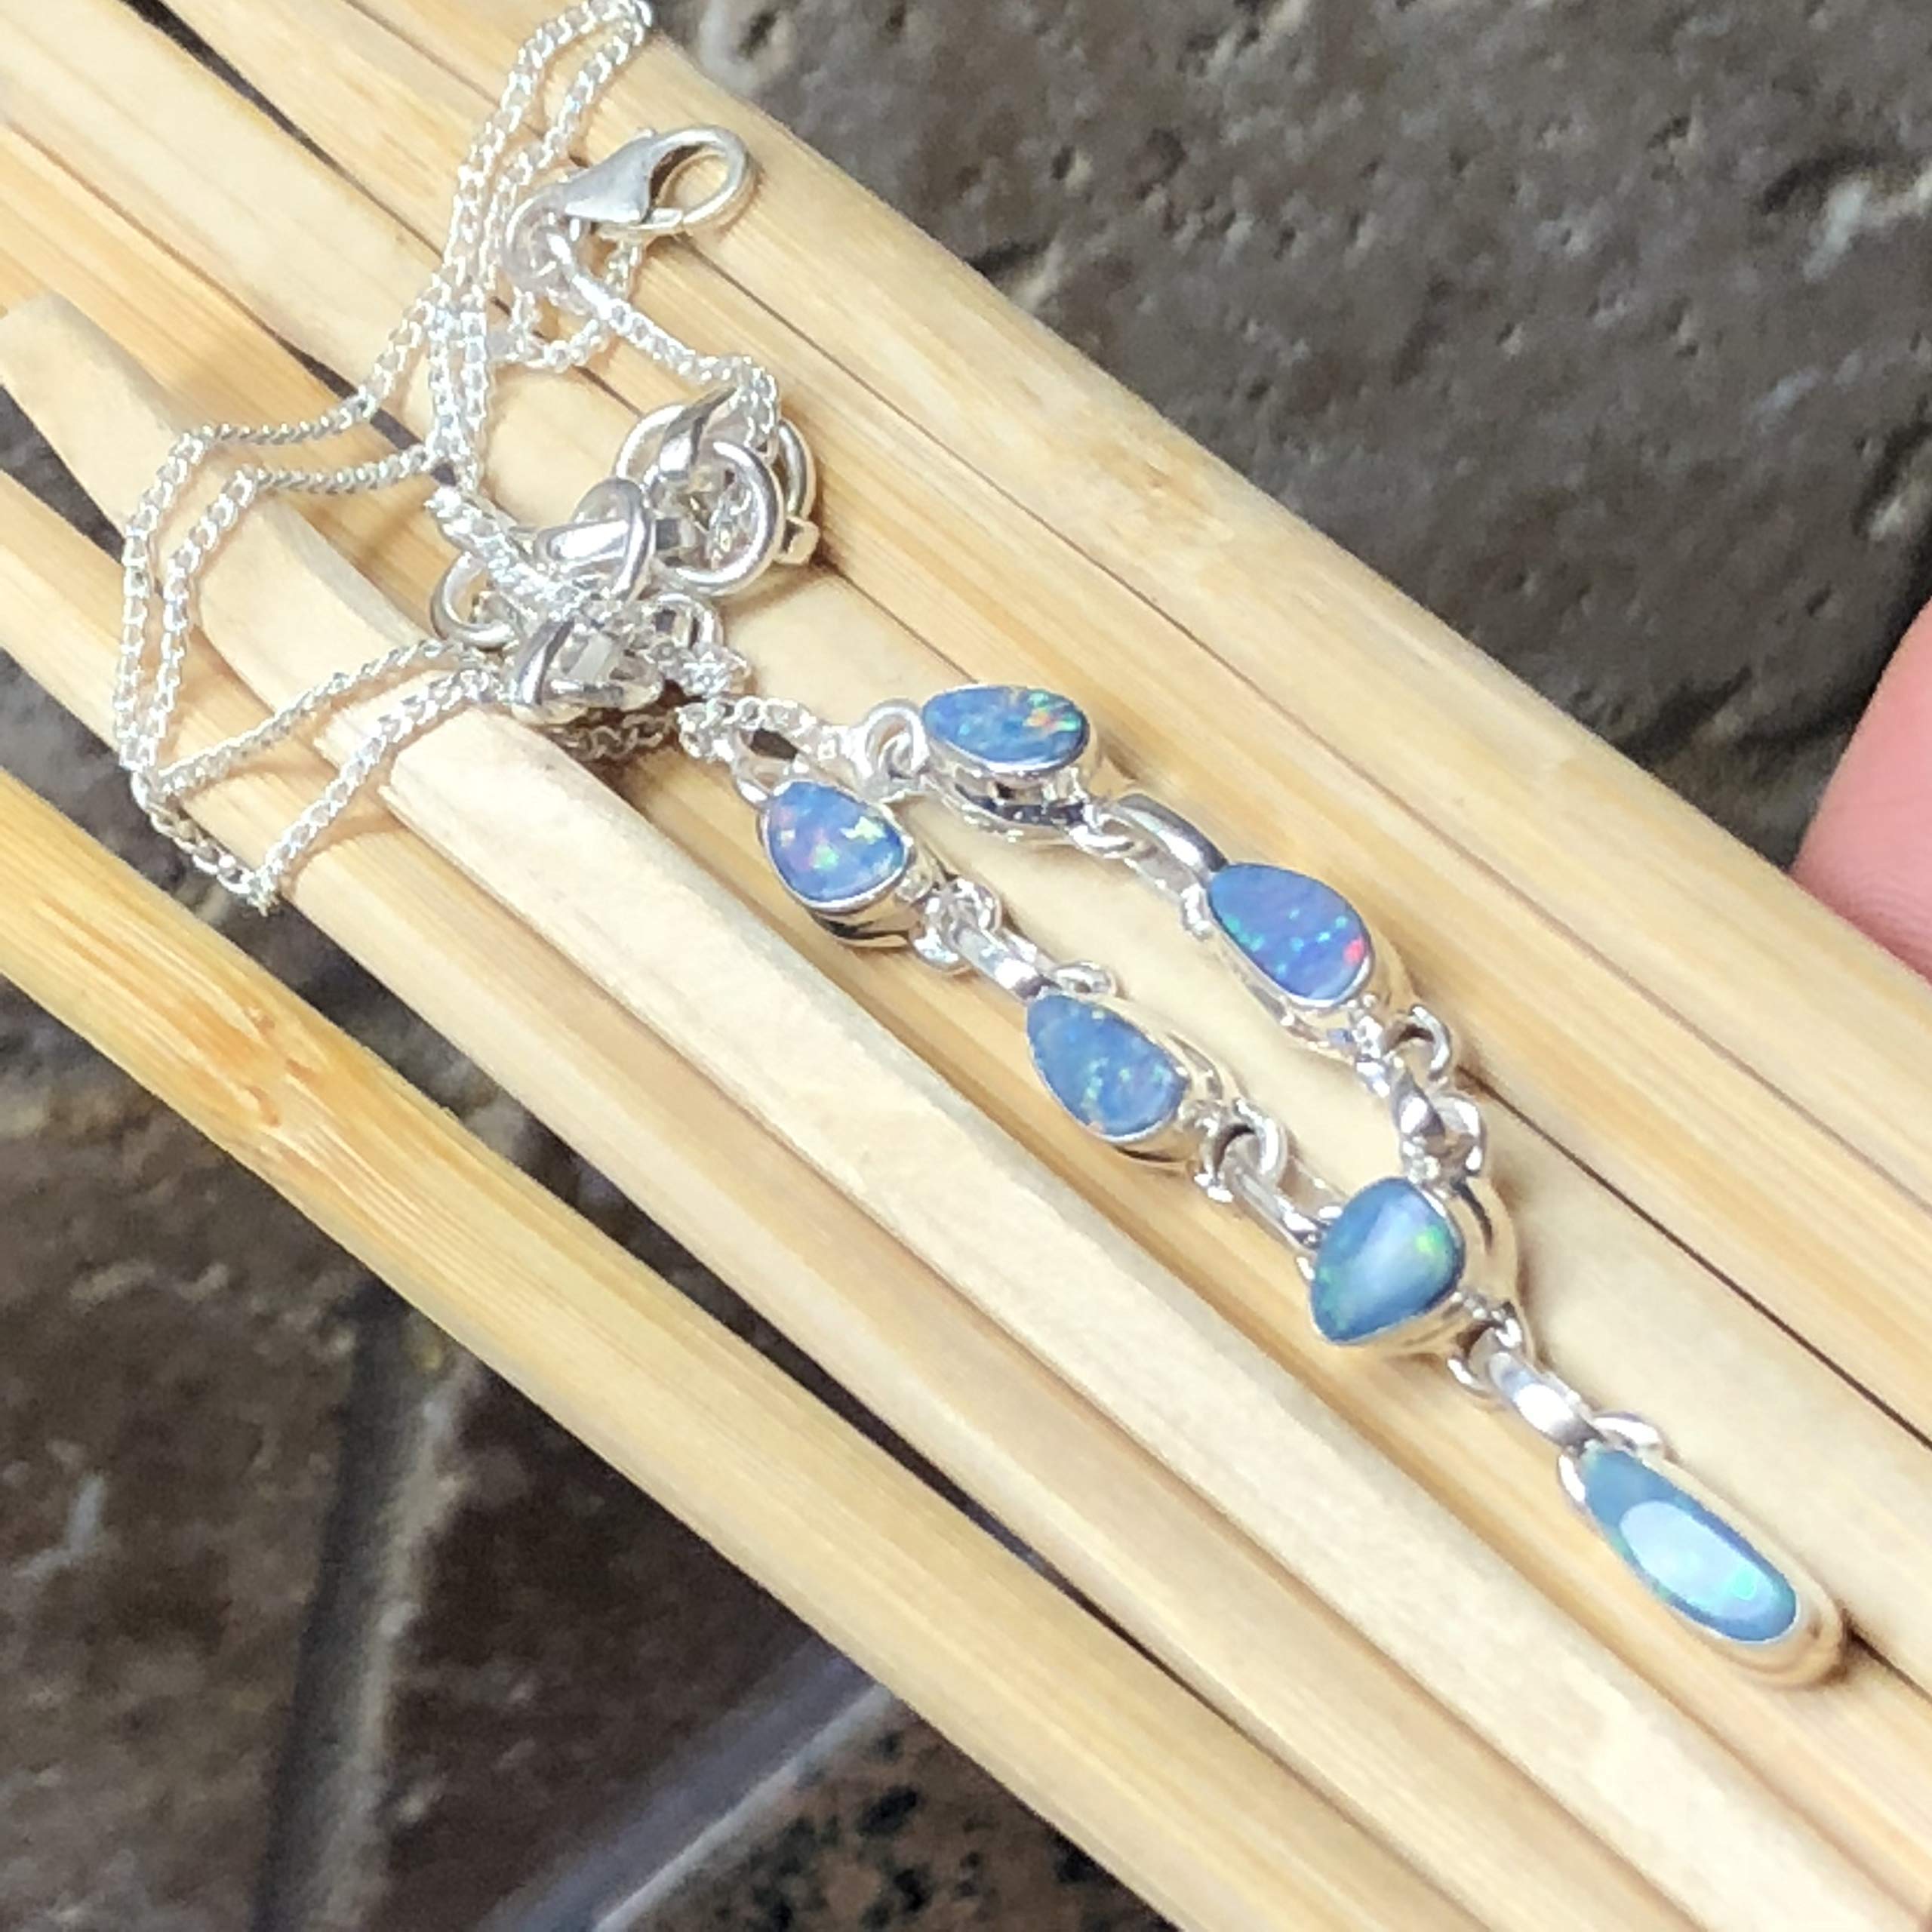 Genuine Australian Blue and Green Opal 925 Solid Sterling Silver Necklace 17" inches - Natural Rocks by Kala